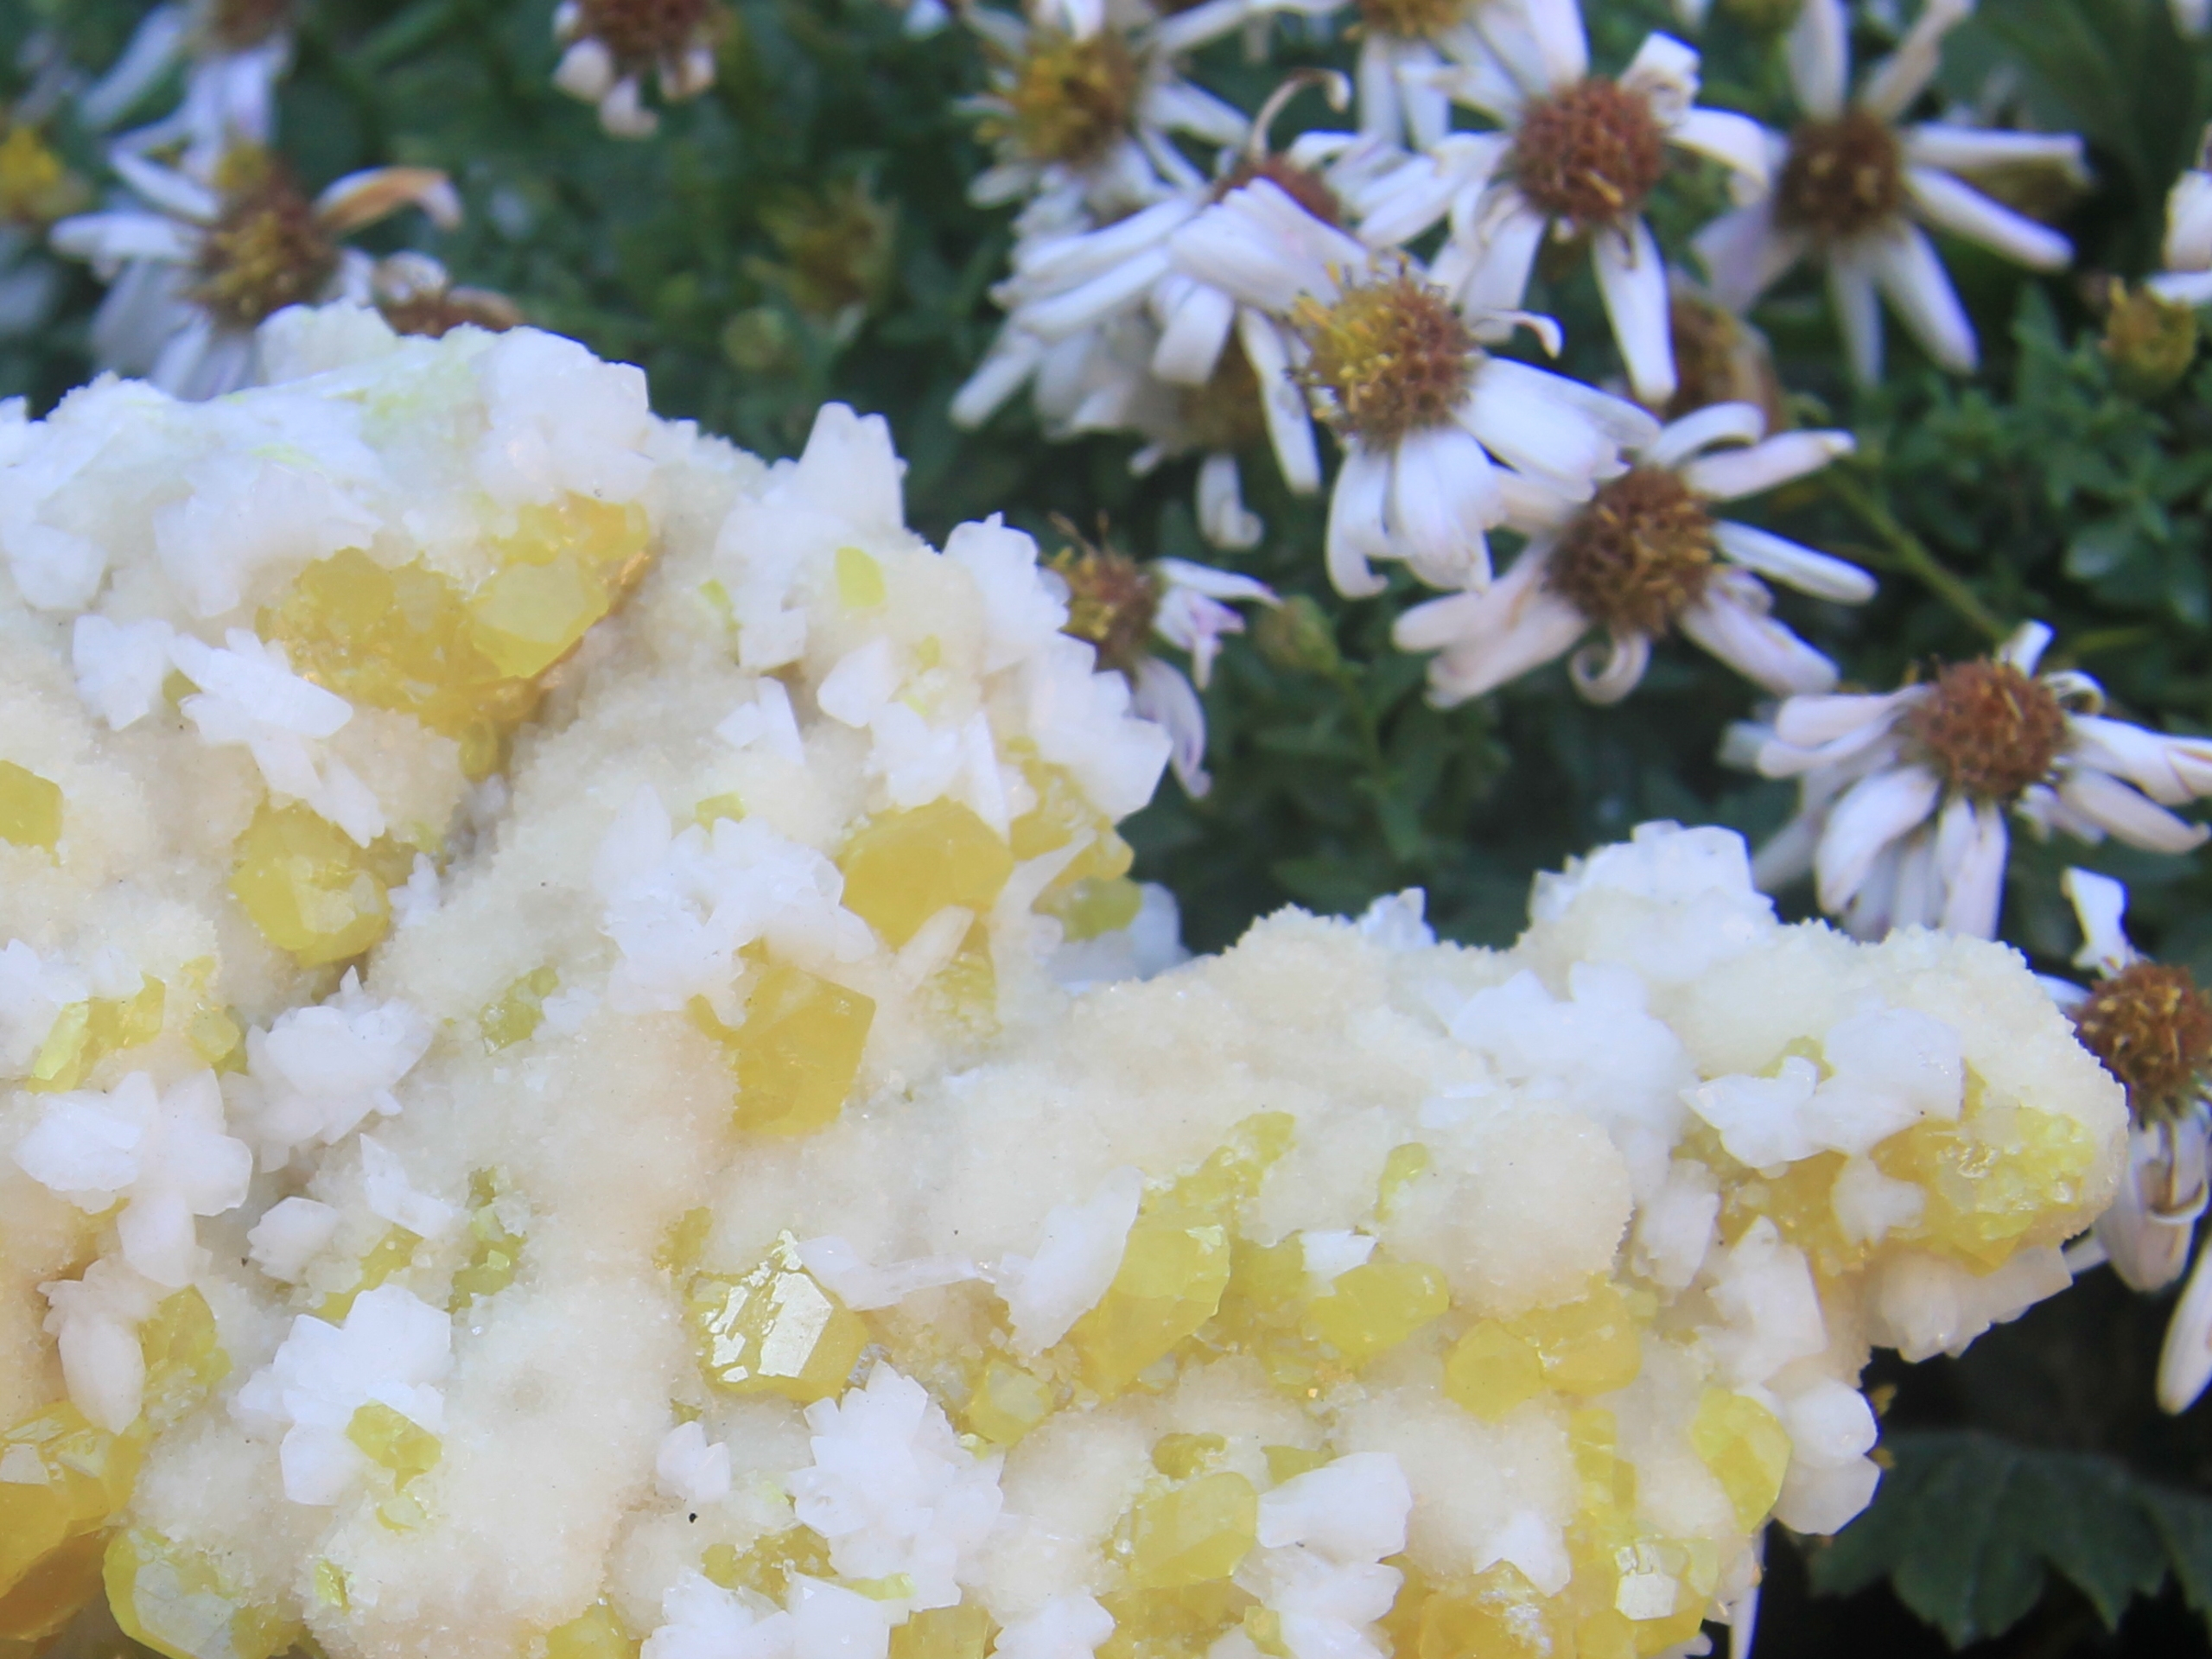 Sulphur crystals and calcite